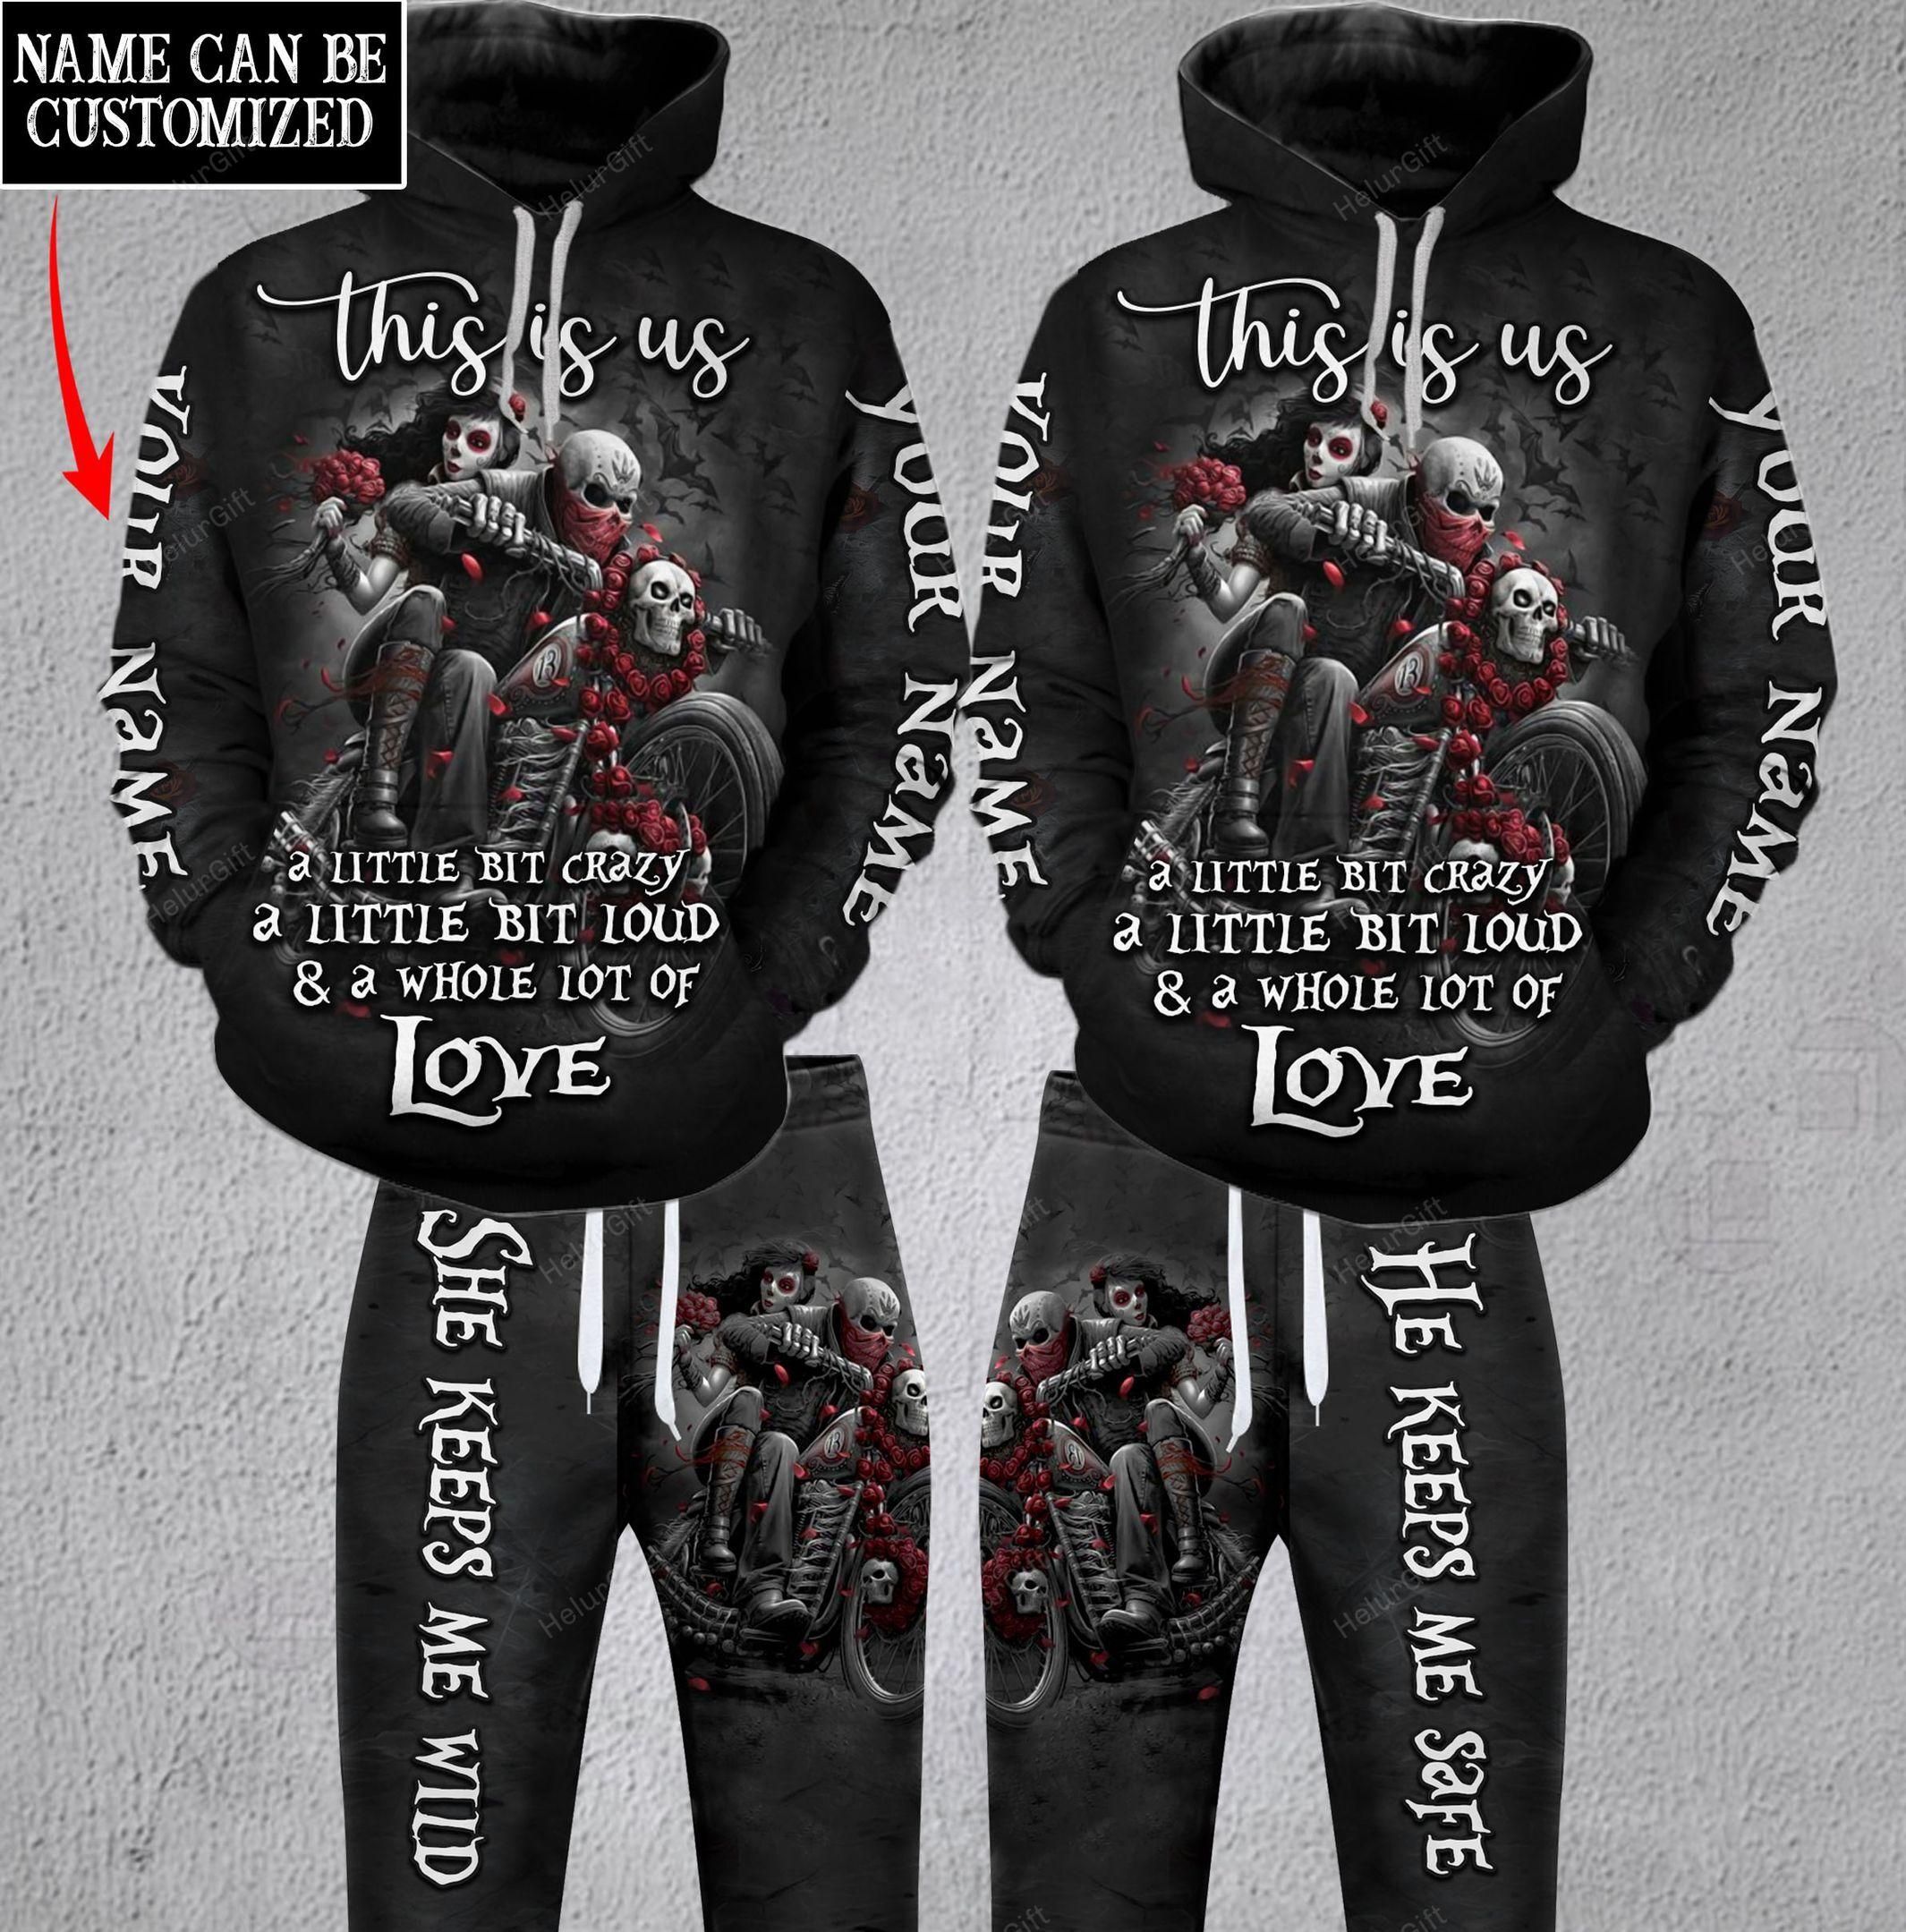 Couple Hoodie Set Personalized Skeleton Motocycle This Is Us PAN3DSET0135